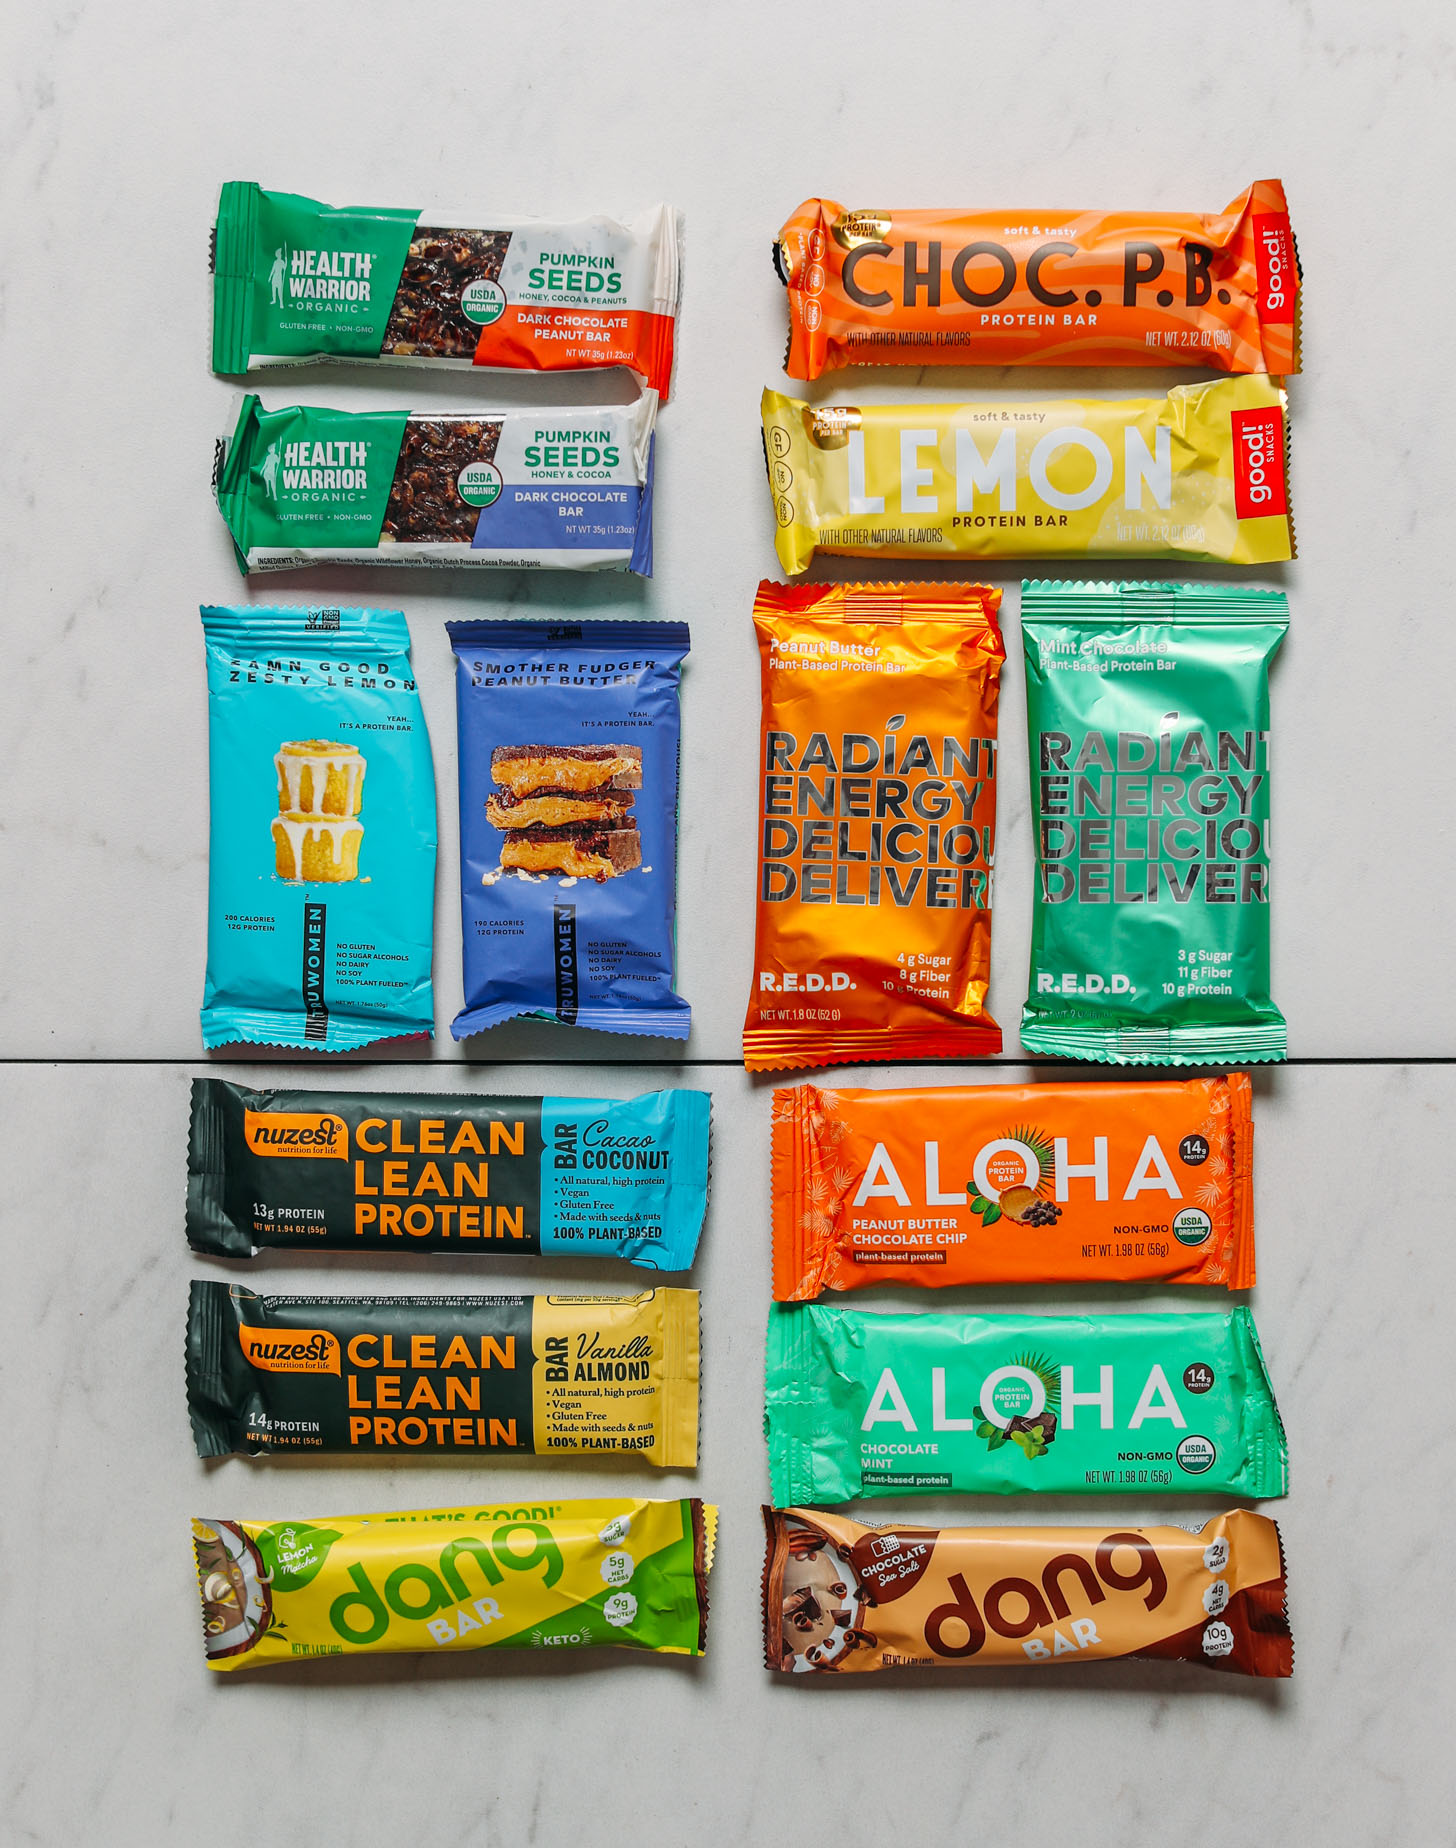 Assortment of plant-based protein bars for our unbiased healthy protein bar review